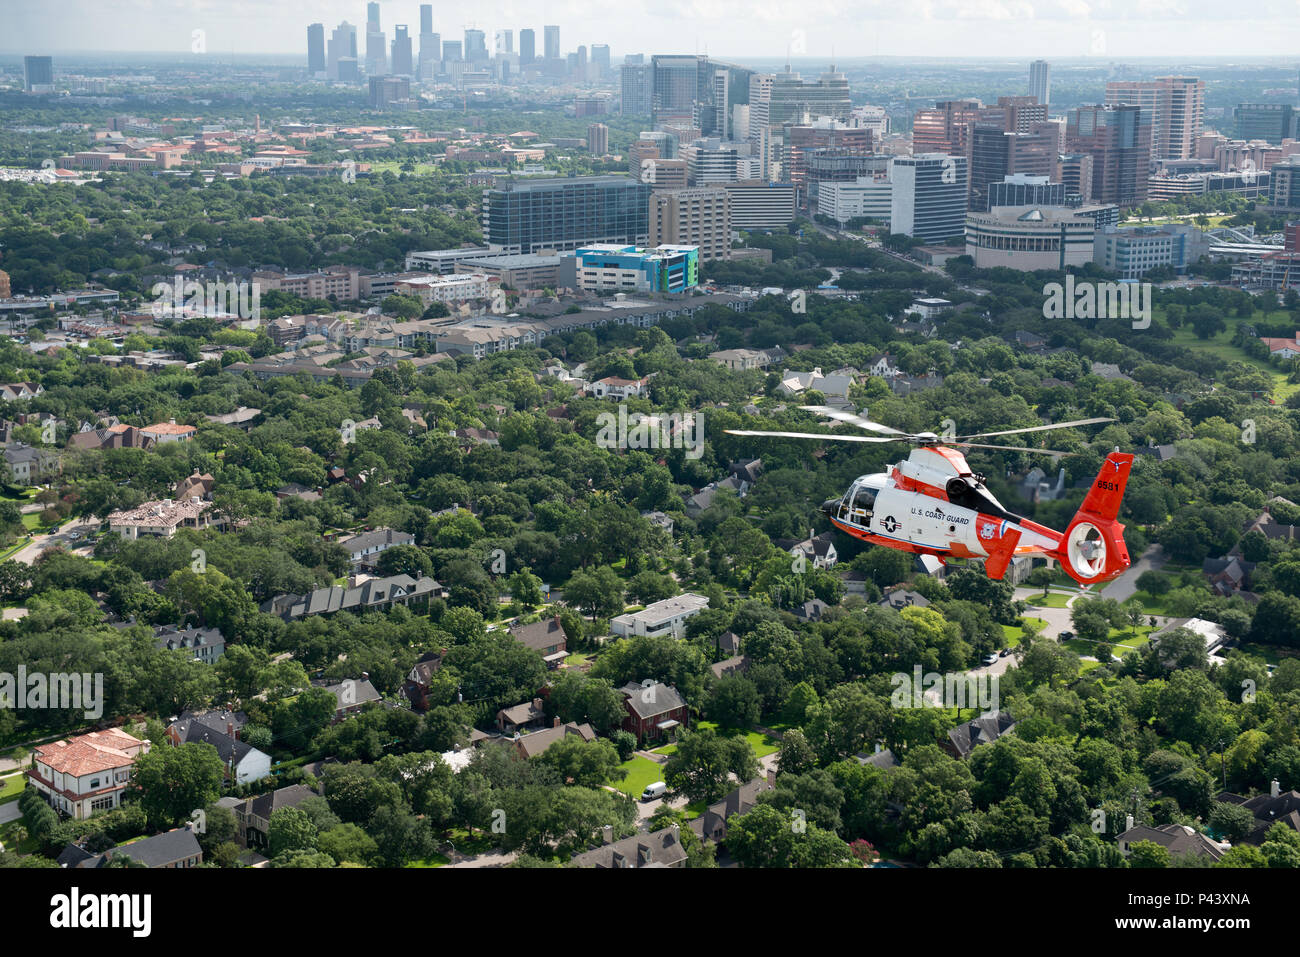 As part of the 100 years of Coast Guard aviation, the Air Station Houston centennial MH-65 Dolphin helicopter participated in a form flight over Houston, June 10, 2016. Form Flights offer a unique opportunity to see Coast Guard aircraft from a different point-of-view. U.S. Coast Guard photo by Petty Officer 3rd Class Dustin R. Williams Stock Photo